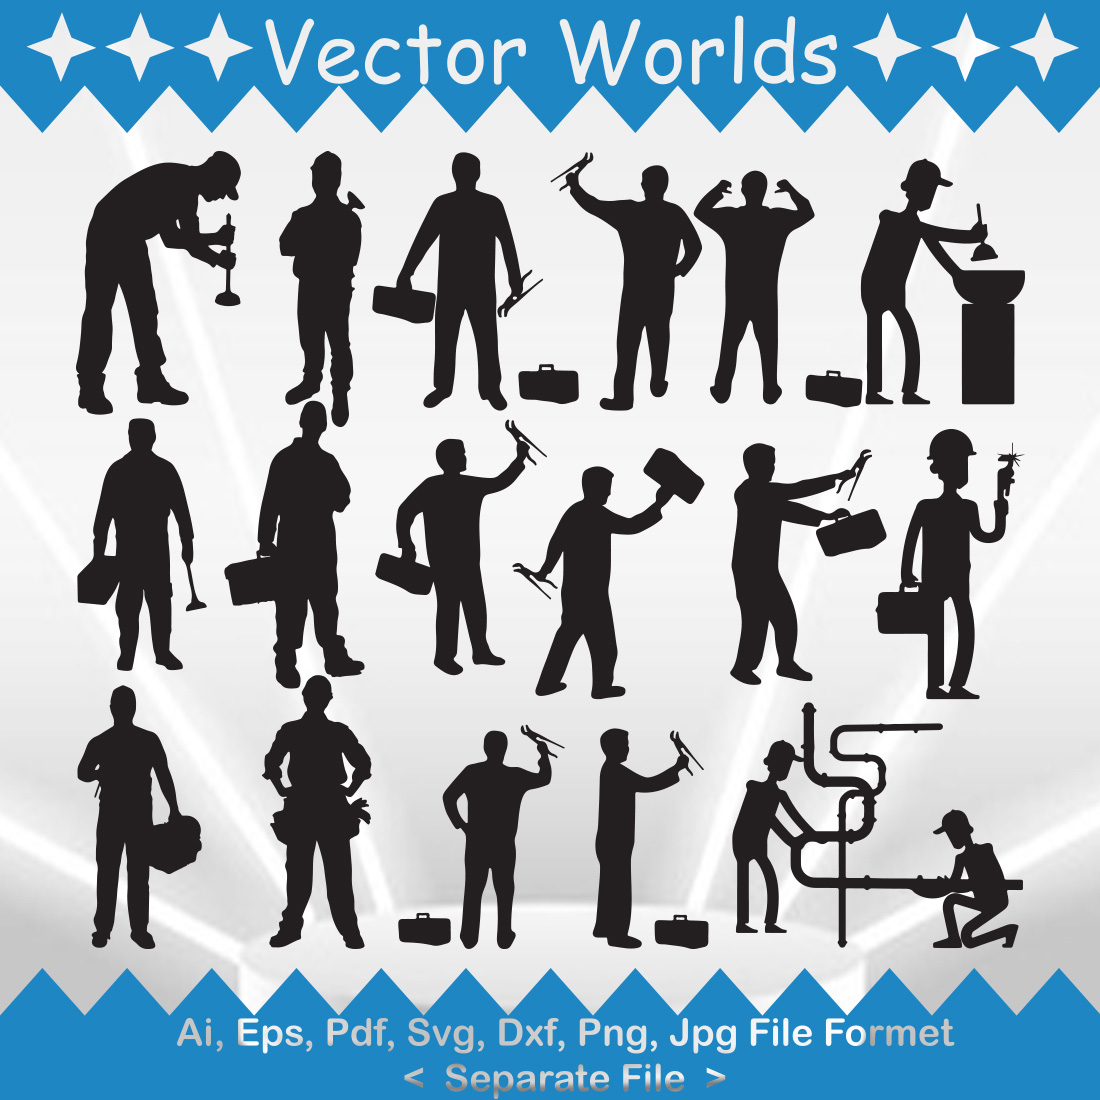 Plumbing SVG Vector Design cover image.